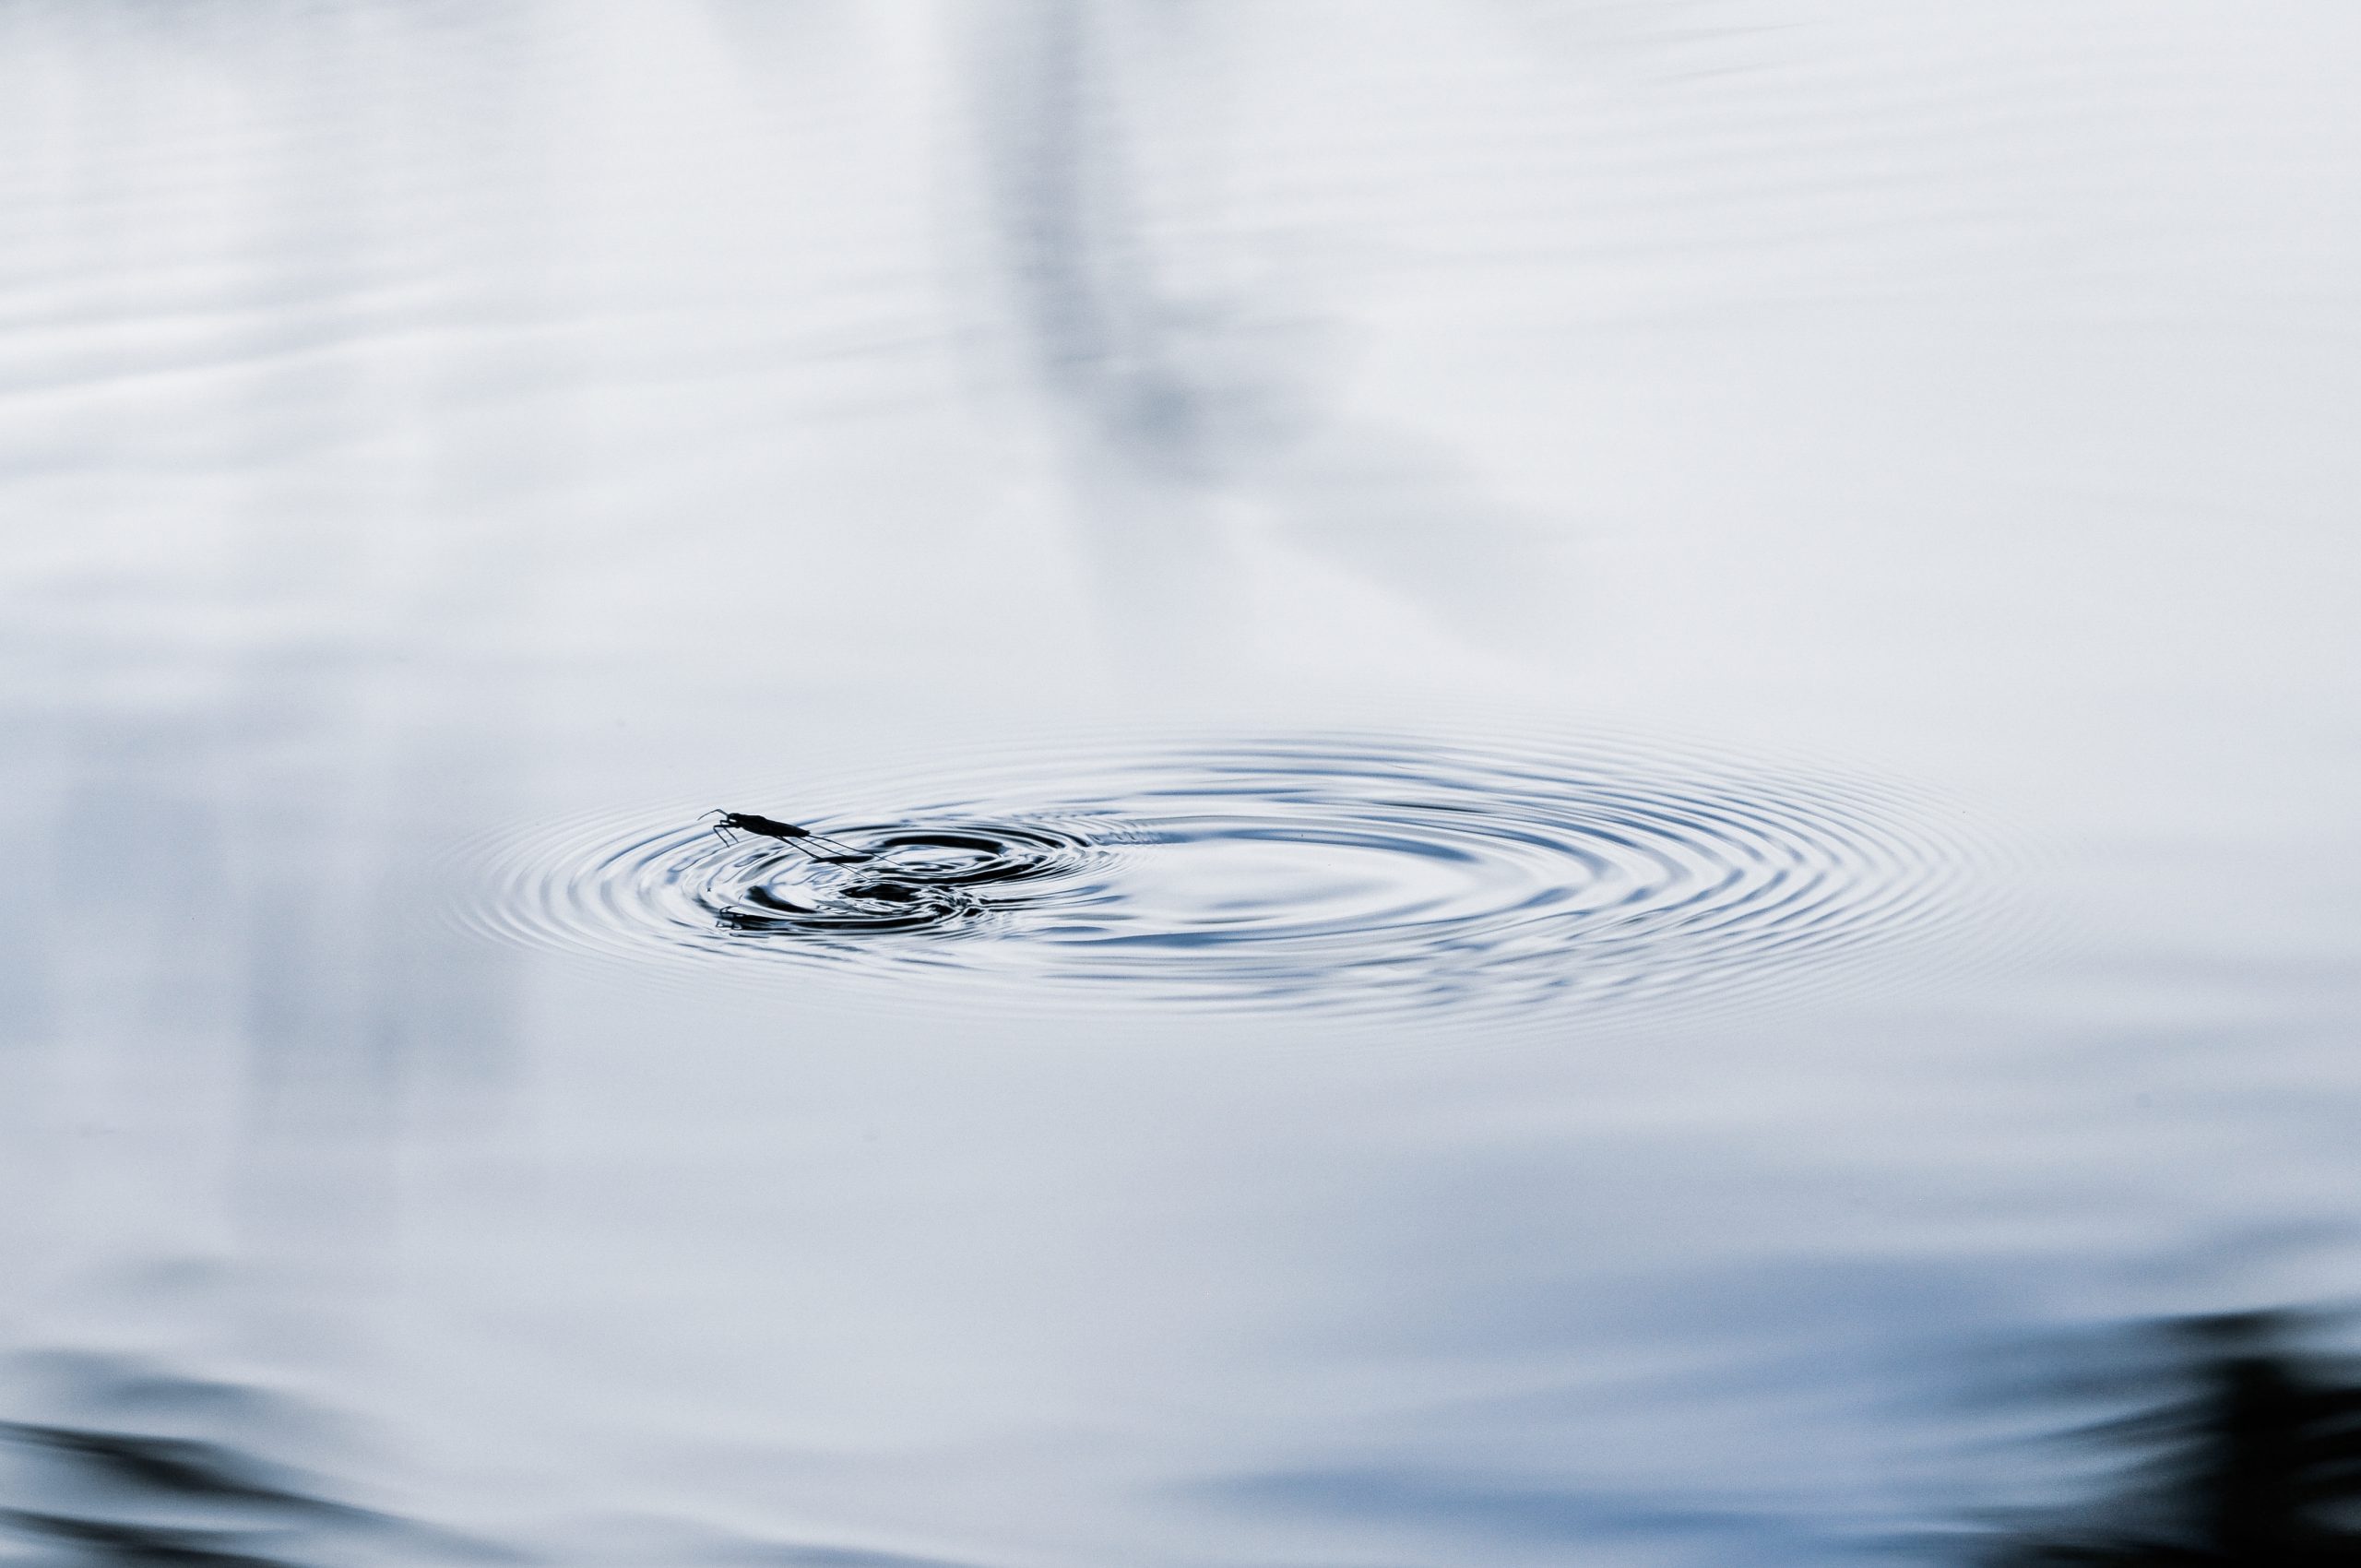 A photo of a pond skater insect hopping off the surface of the water, leaving ripples on the water.